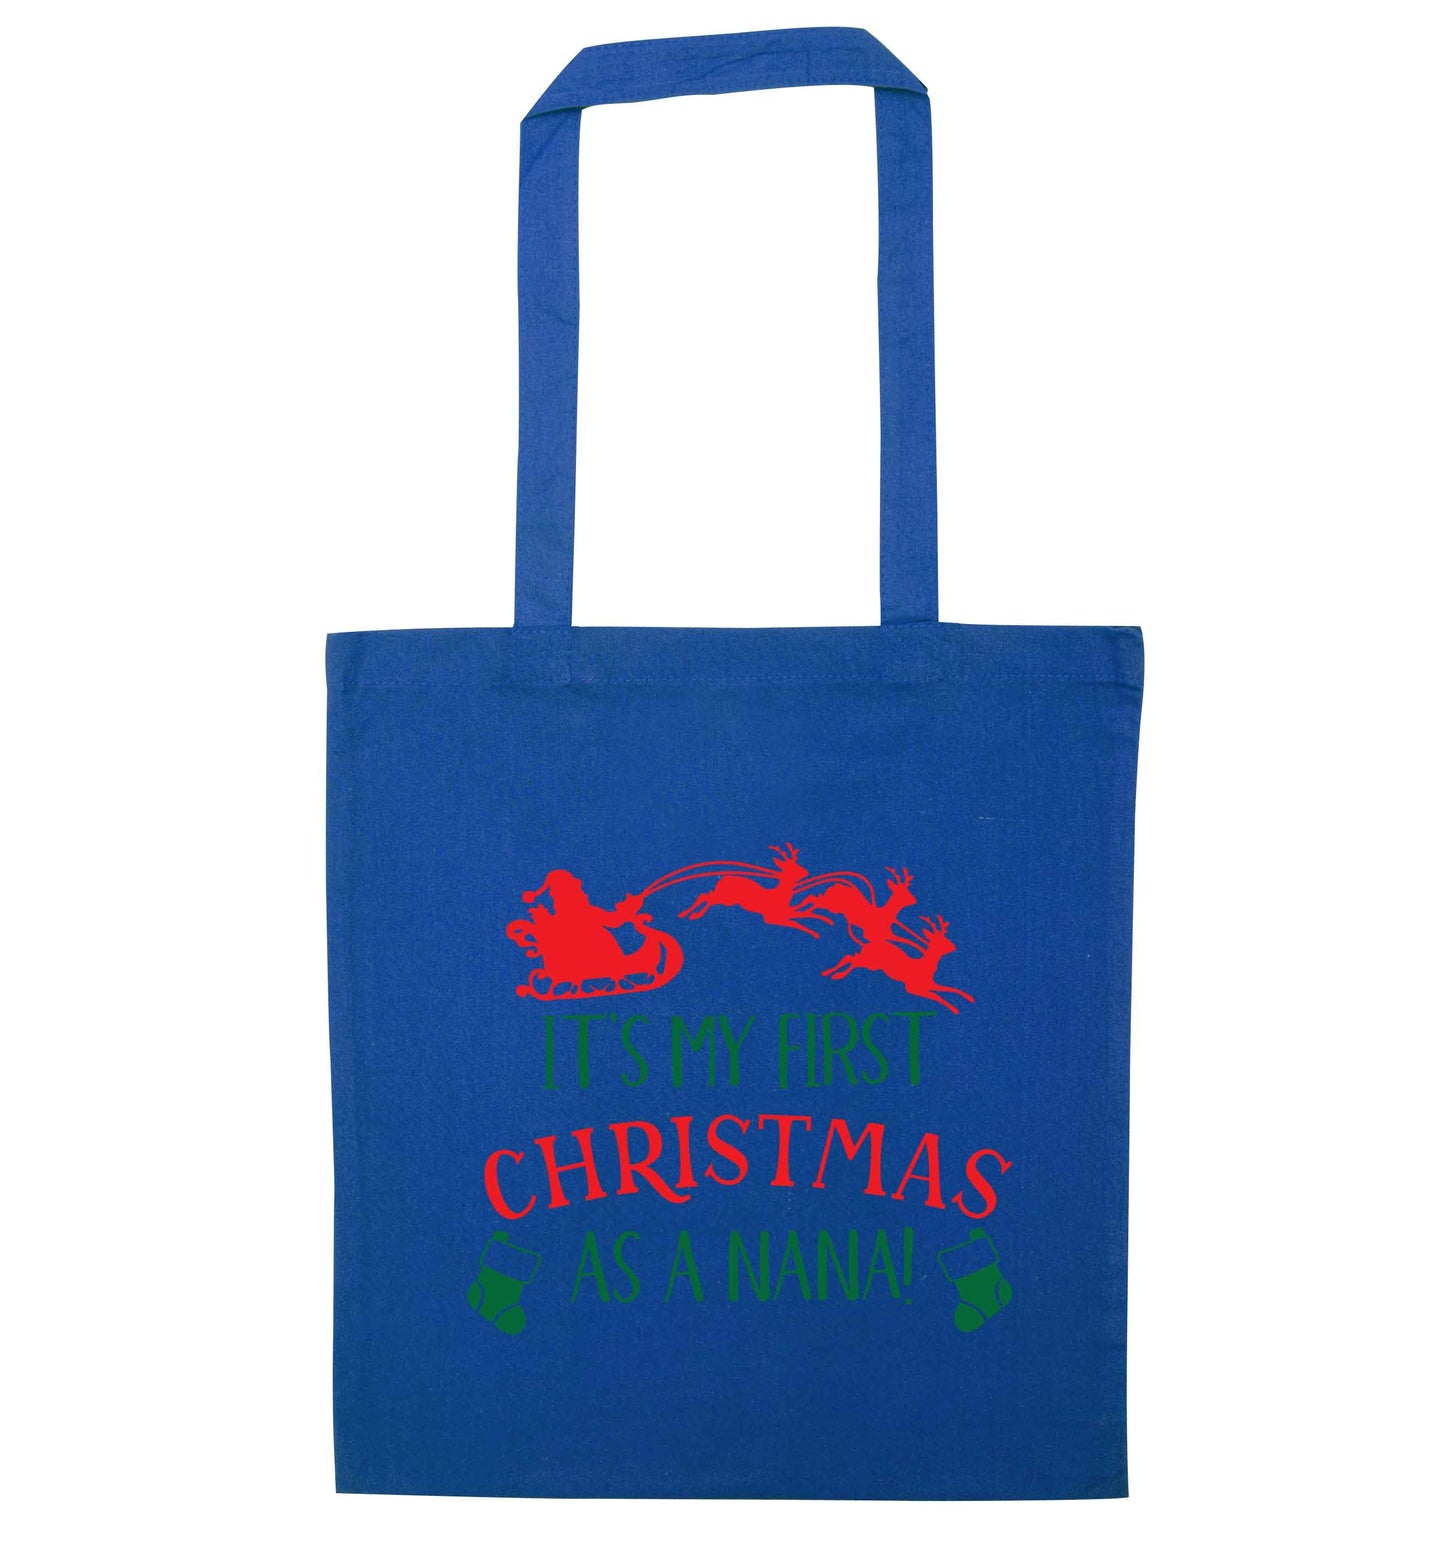 It's my first Christmas as a nana blue tote bag